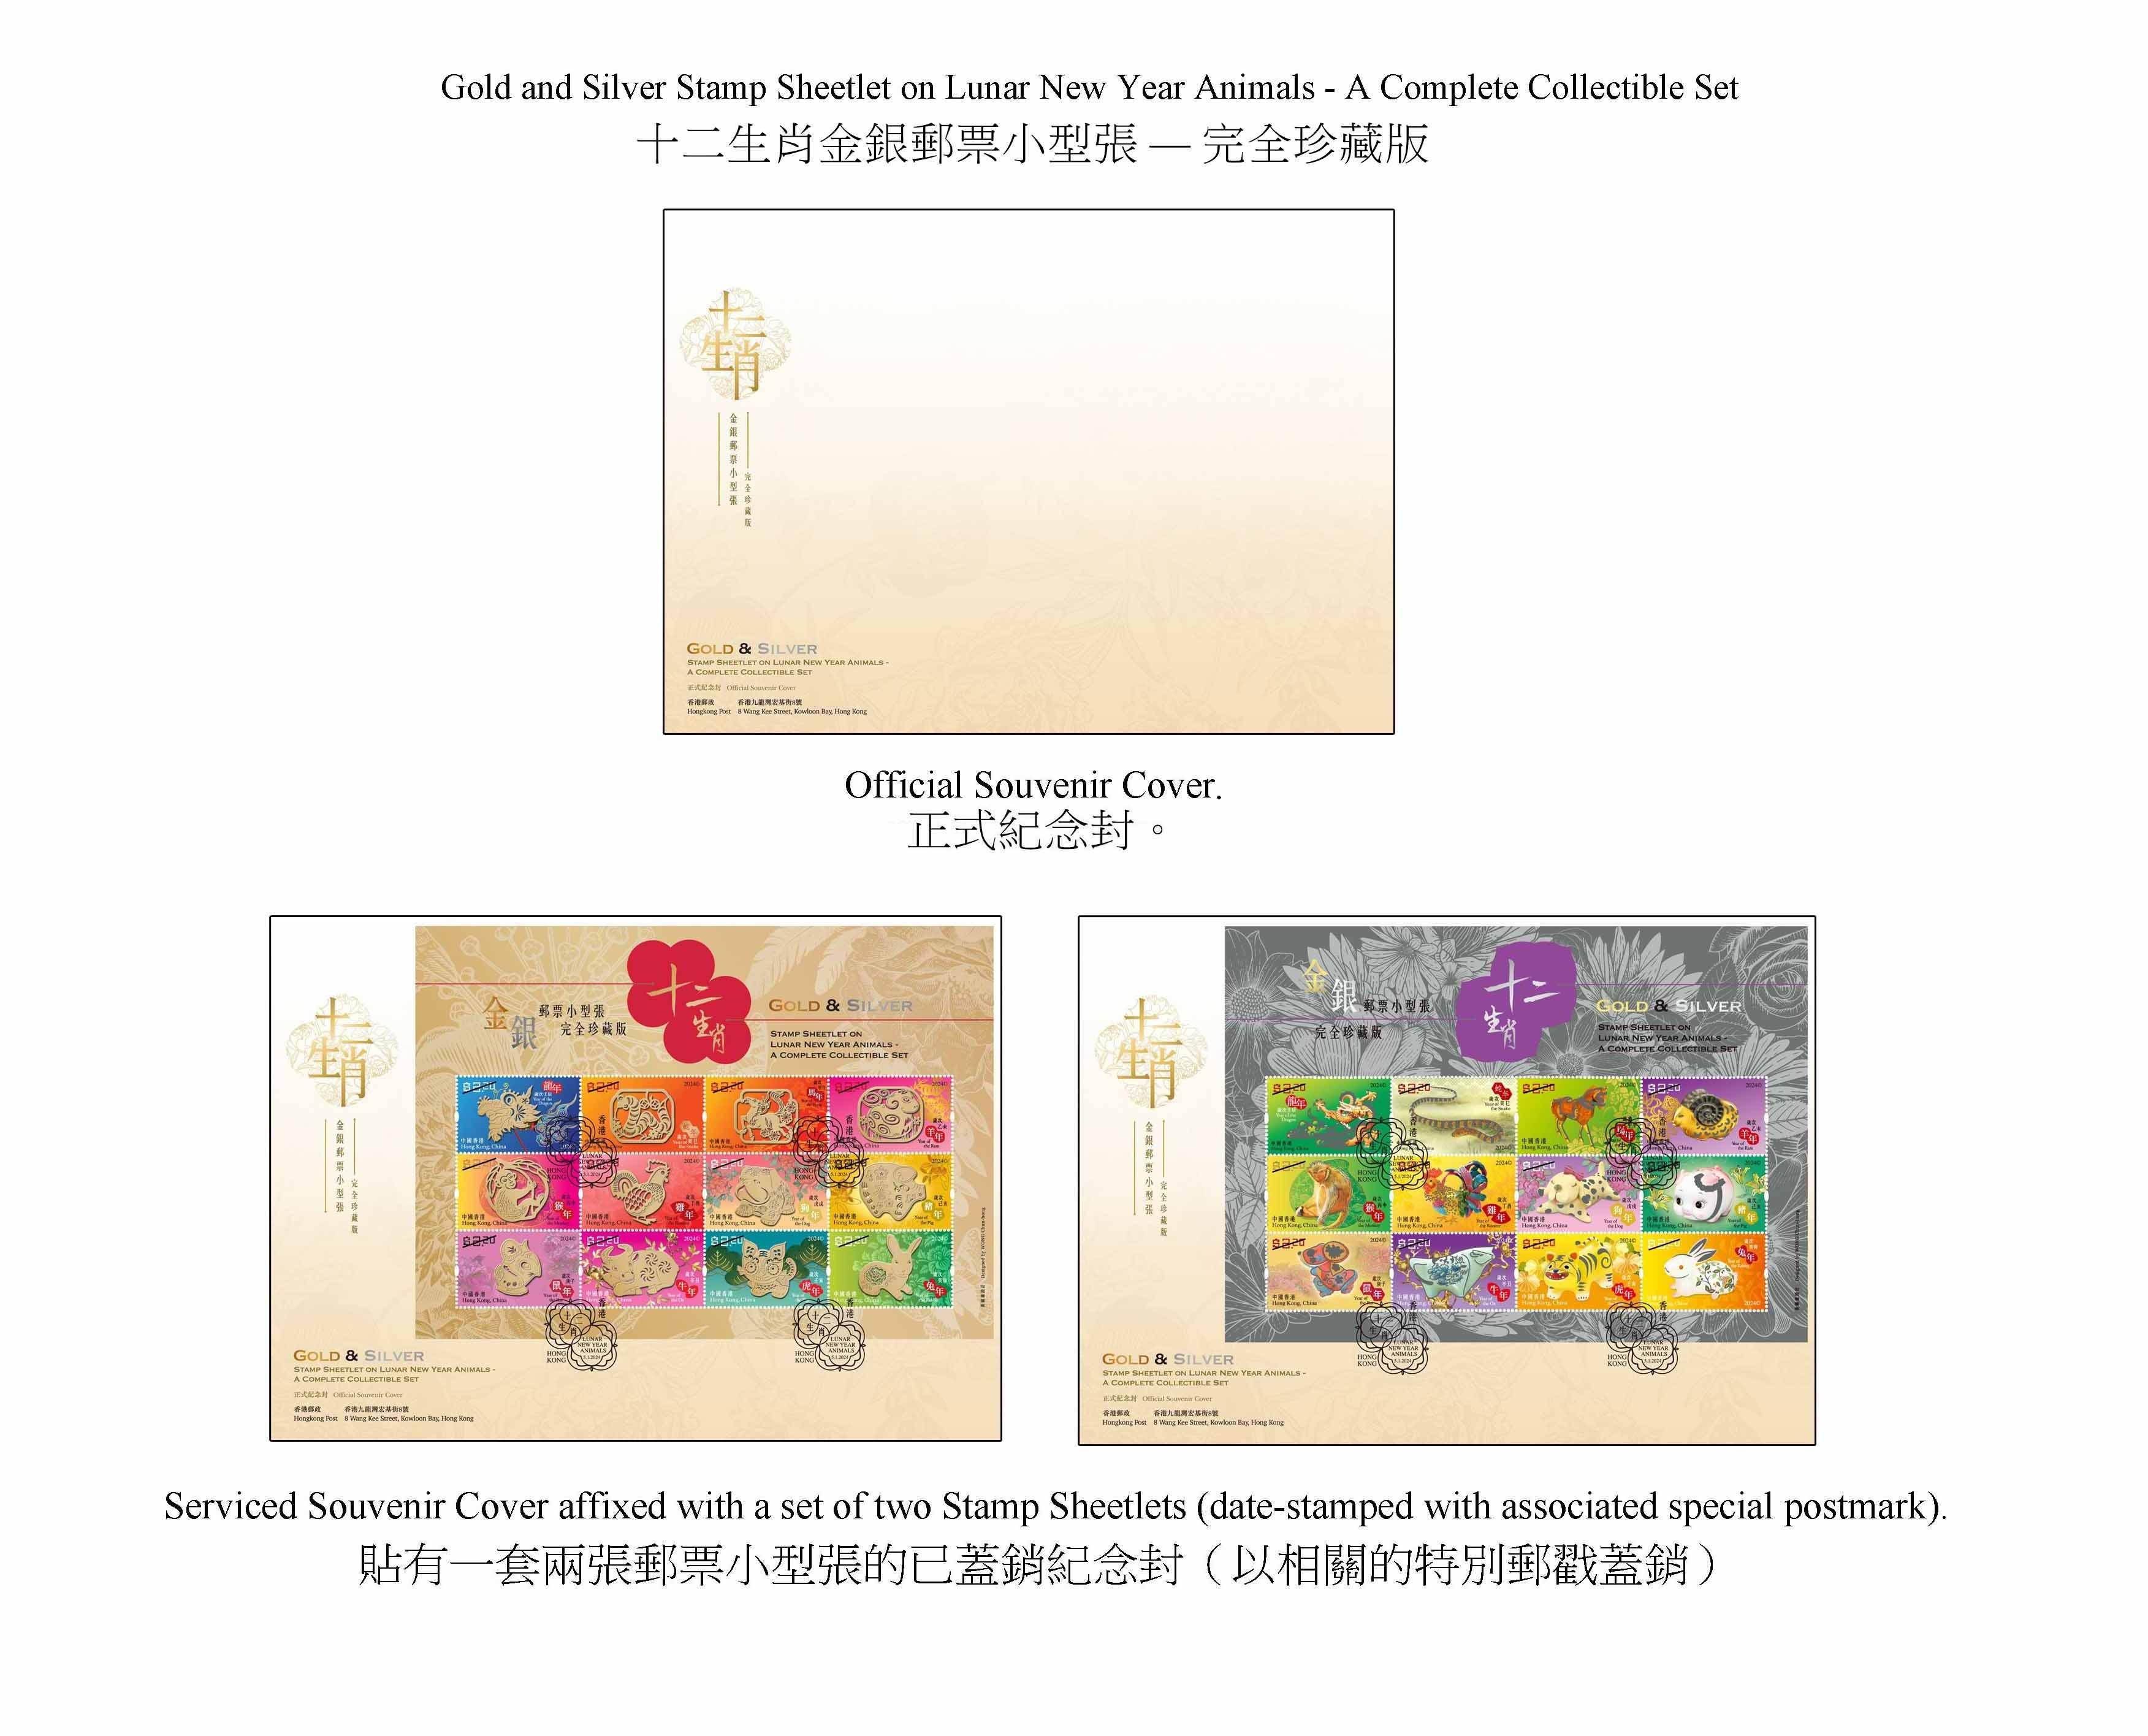 Hongkong Post will launch a special stamp issue and associated philatelic products on the theme of "Year of the Dragon" on January 5, 2024 (Friday). The "Gold and Silver Stamp Sheetlet on Lunar New Year Animals - A Complete Collectible Set" will also be launched on the same day. Photos show the souvenir covers.
